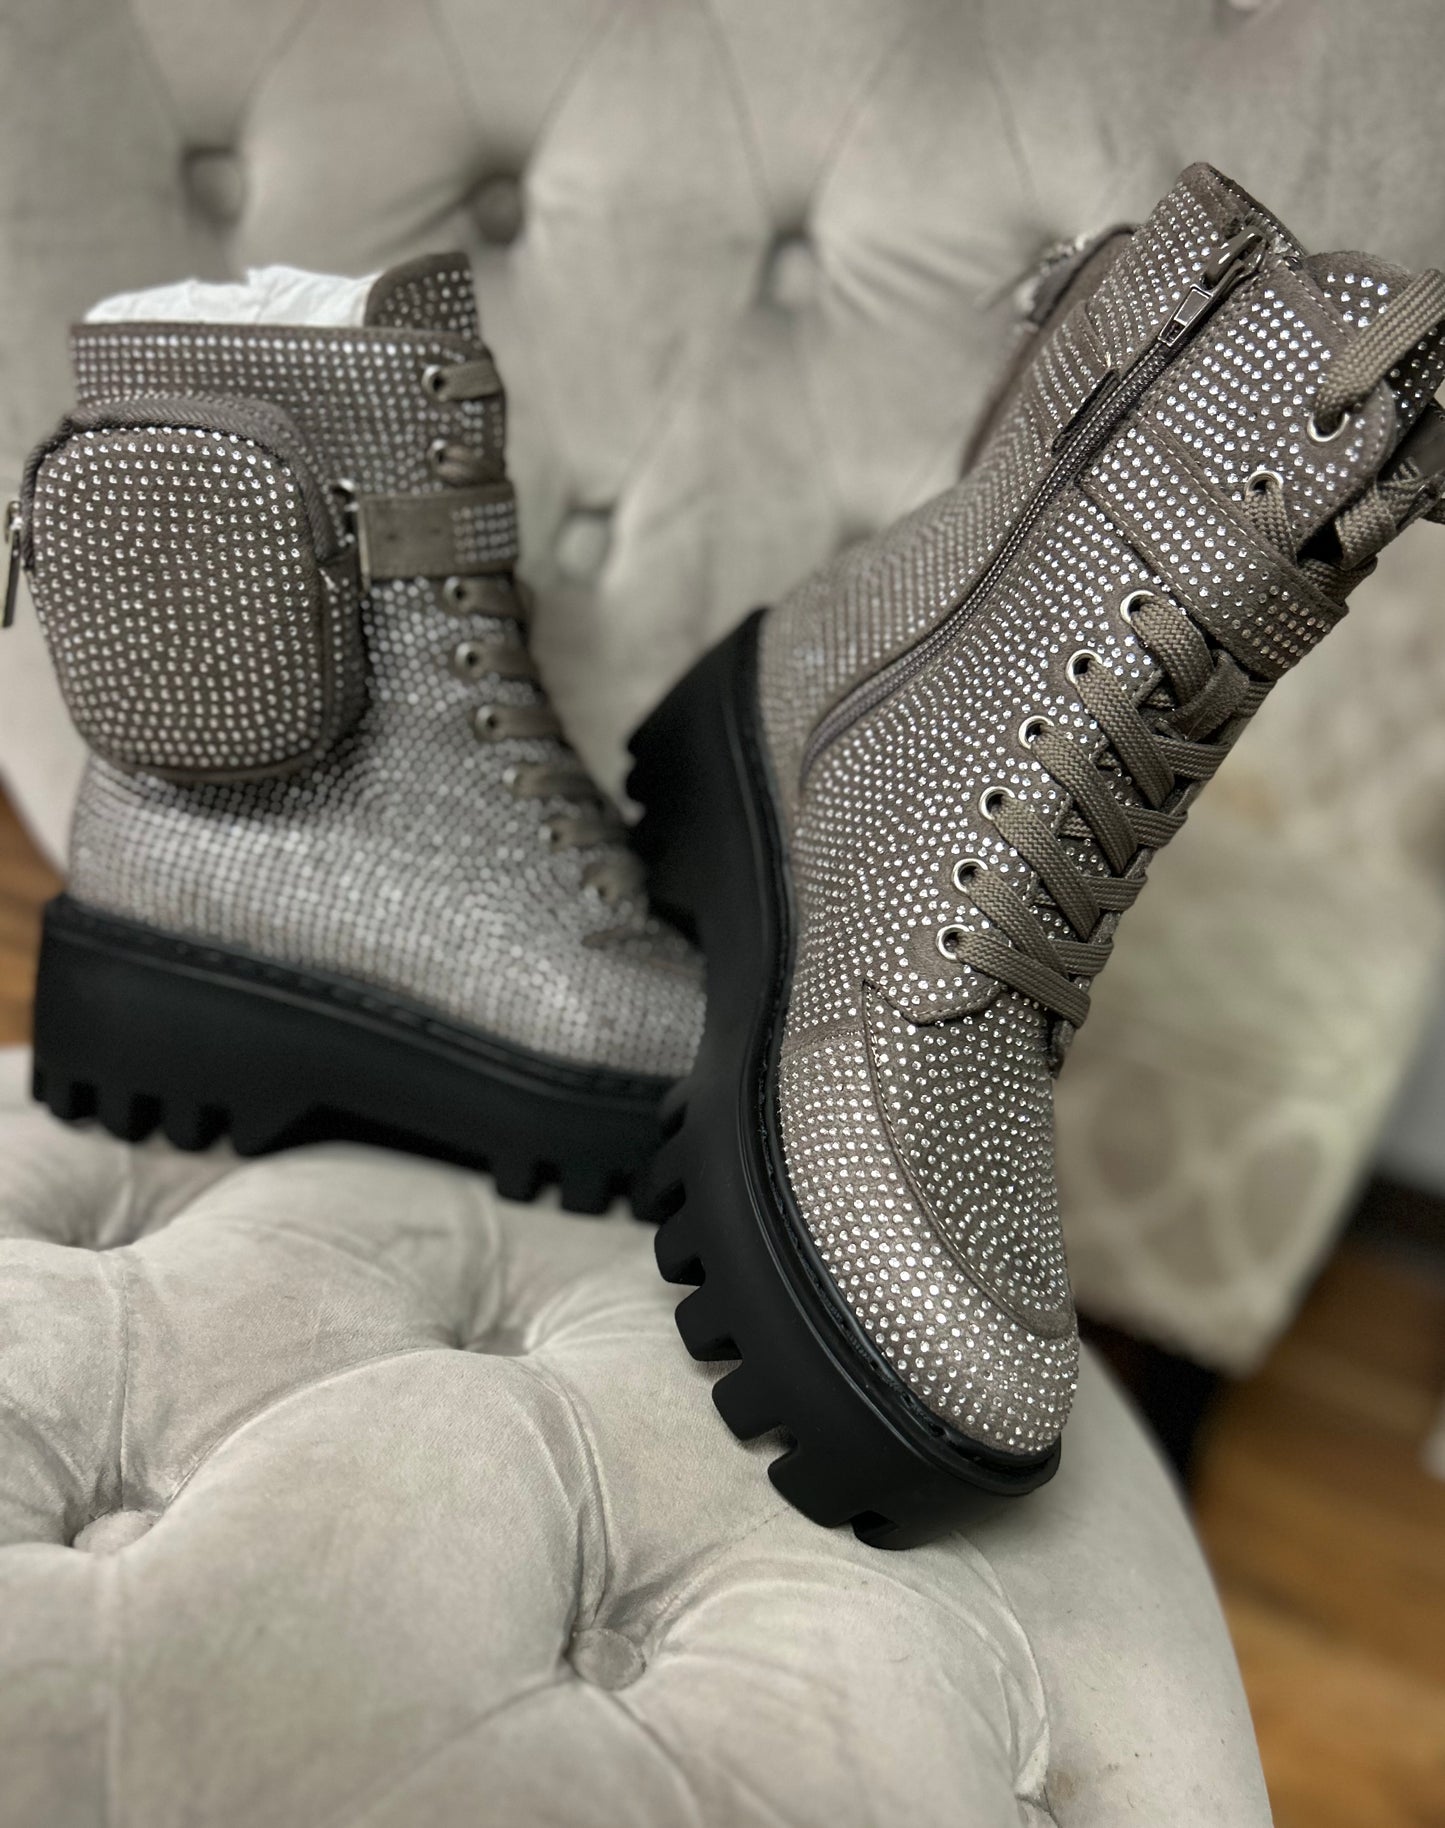 Retro Blinged Boots